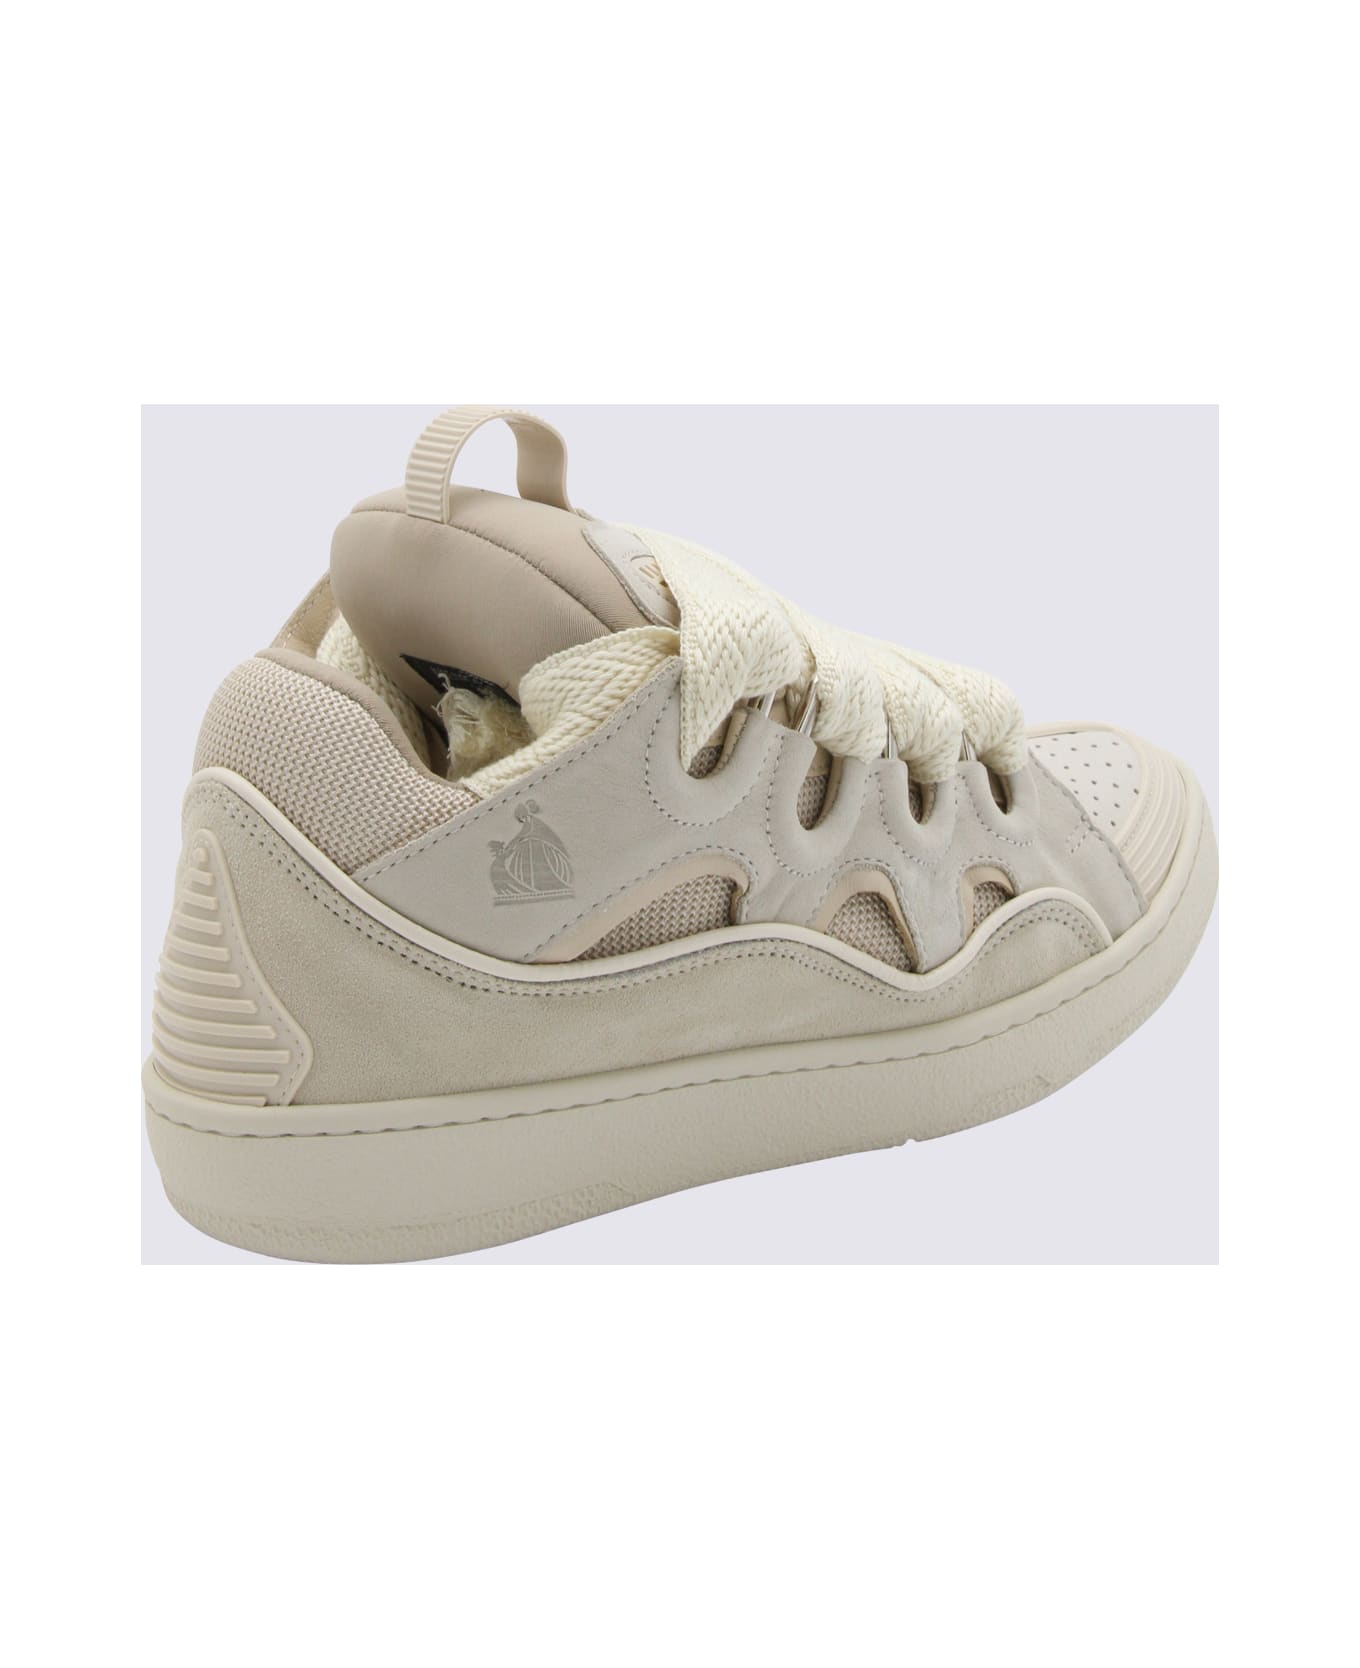 Lanvin White Leather Curb Sneakers - PEACH